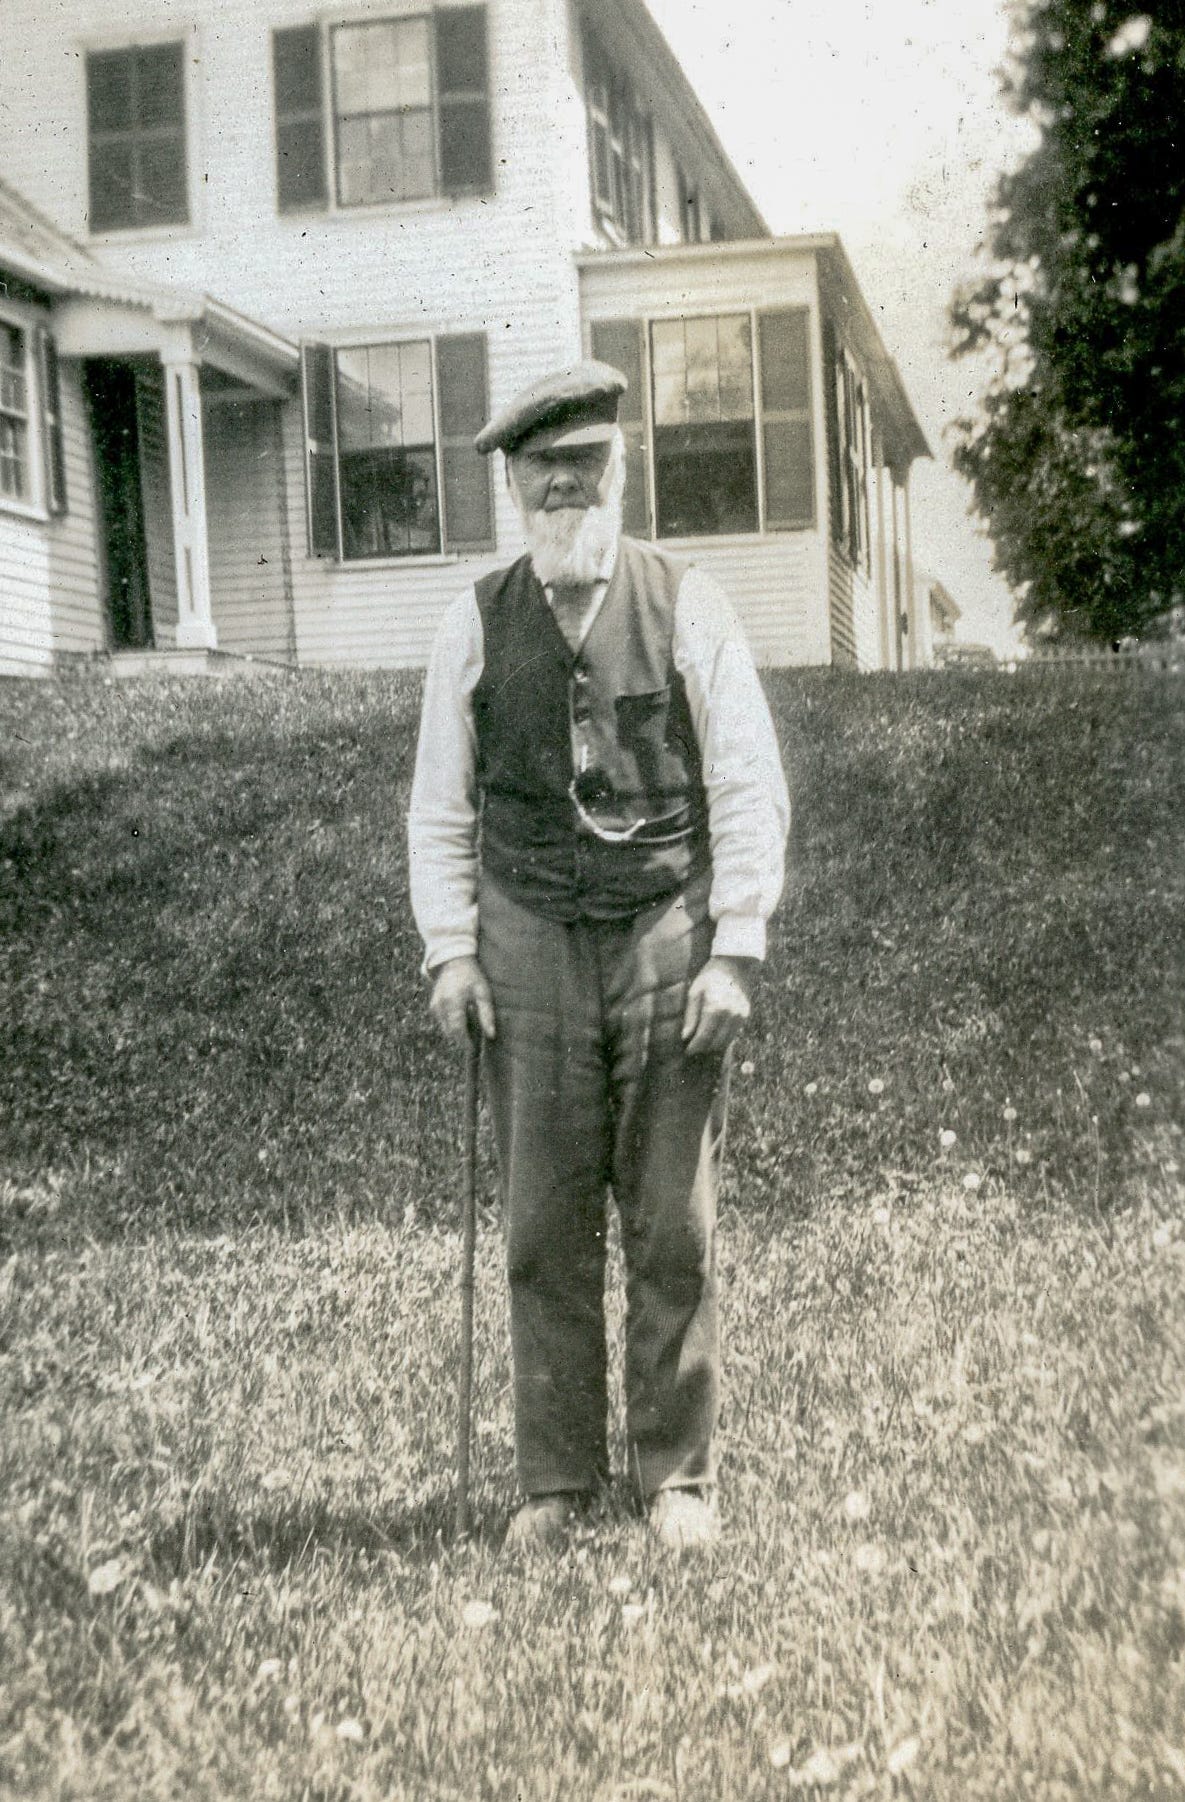 Bearded man with cane in front of house